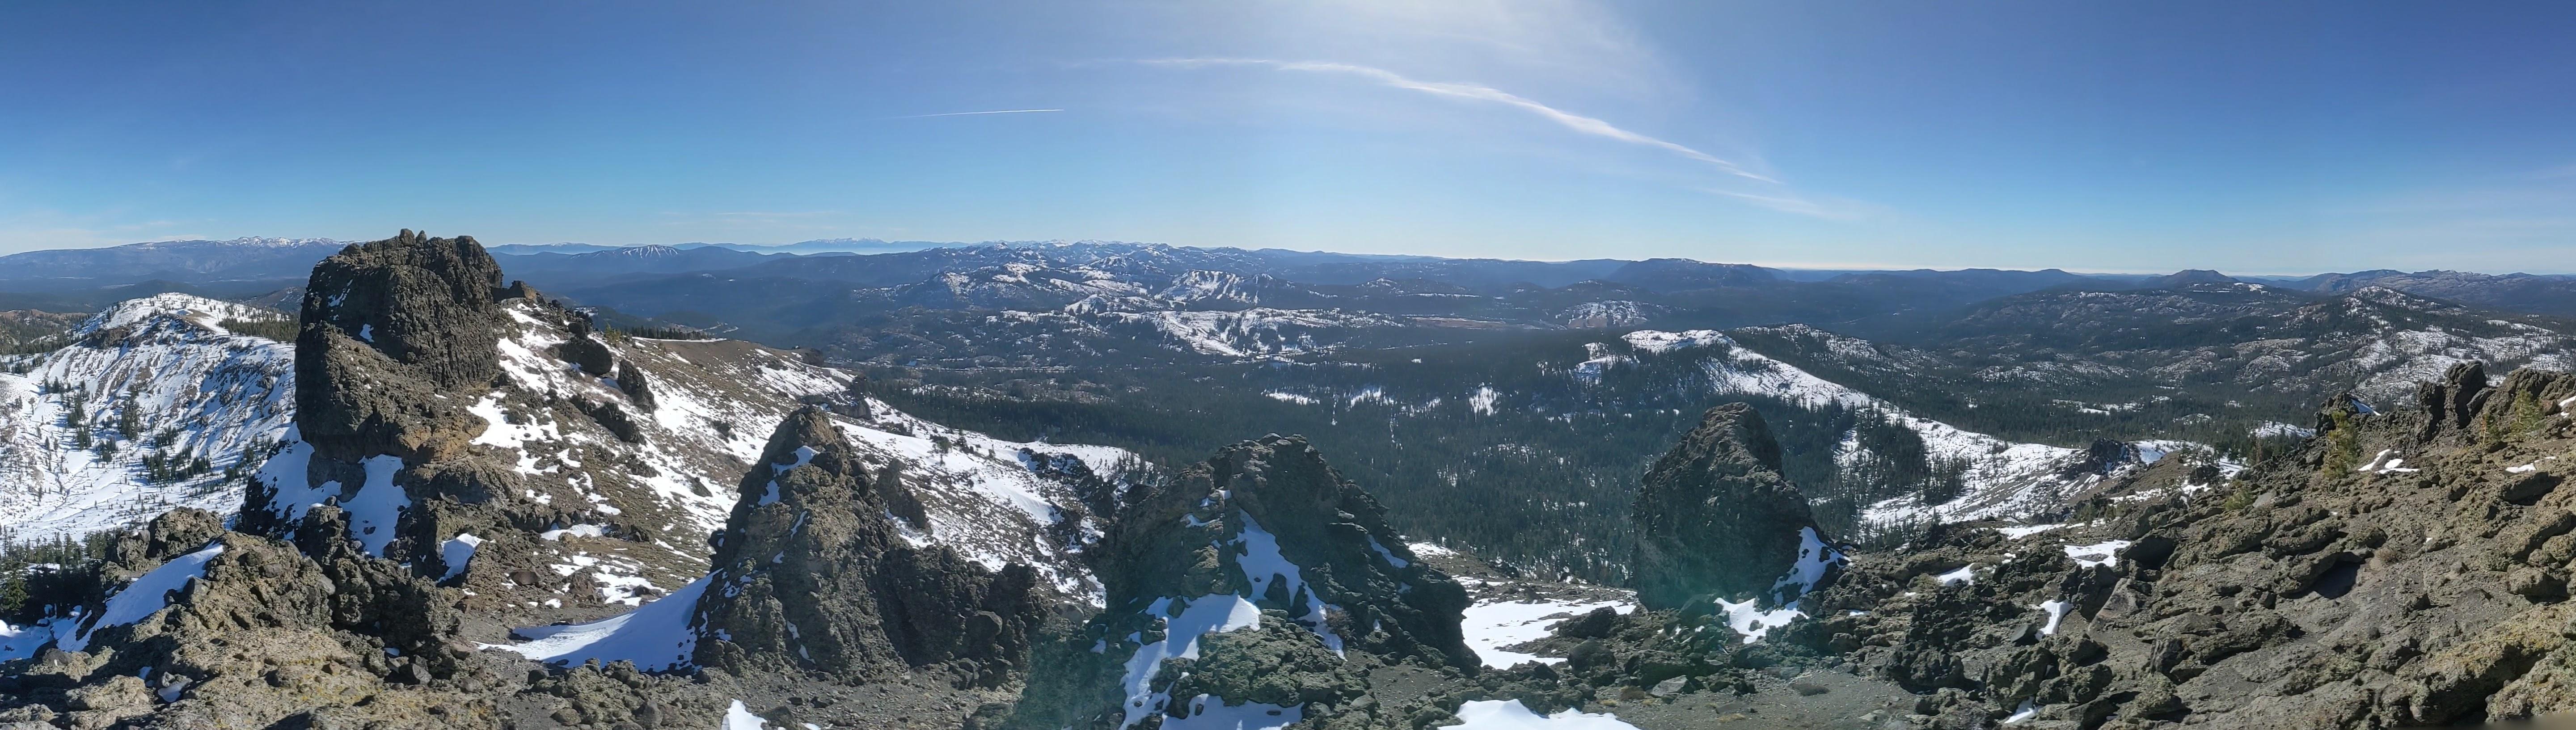 View from the summit toward Donner Lake